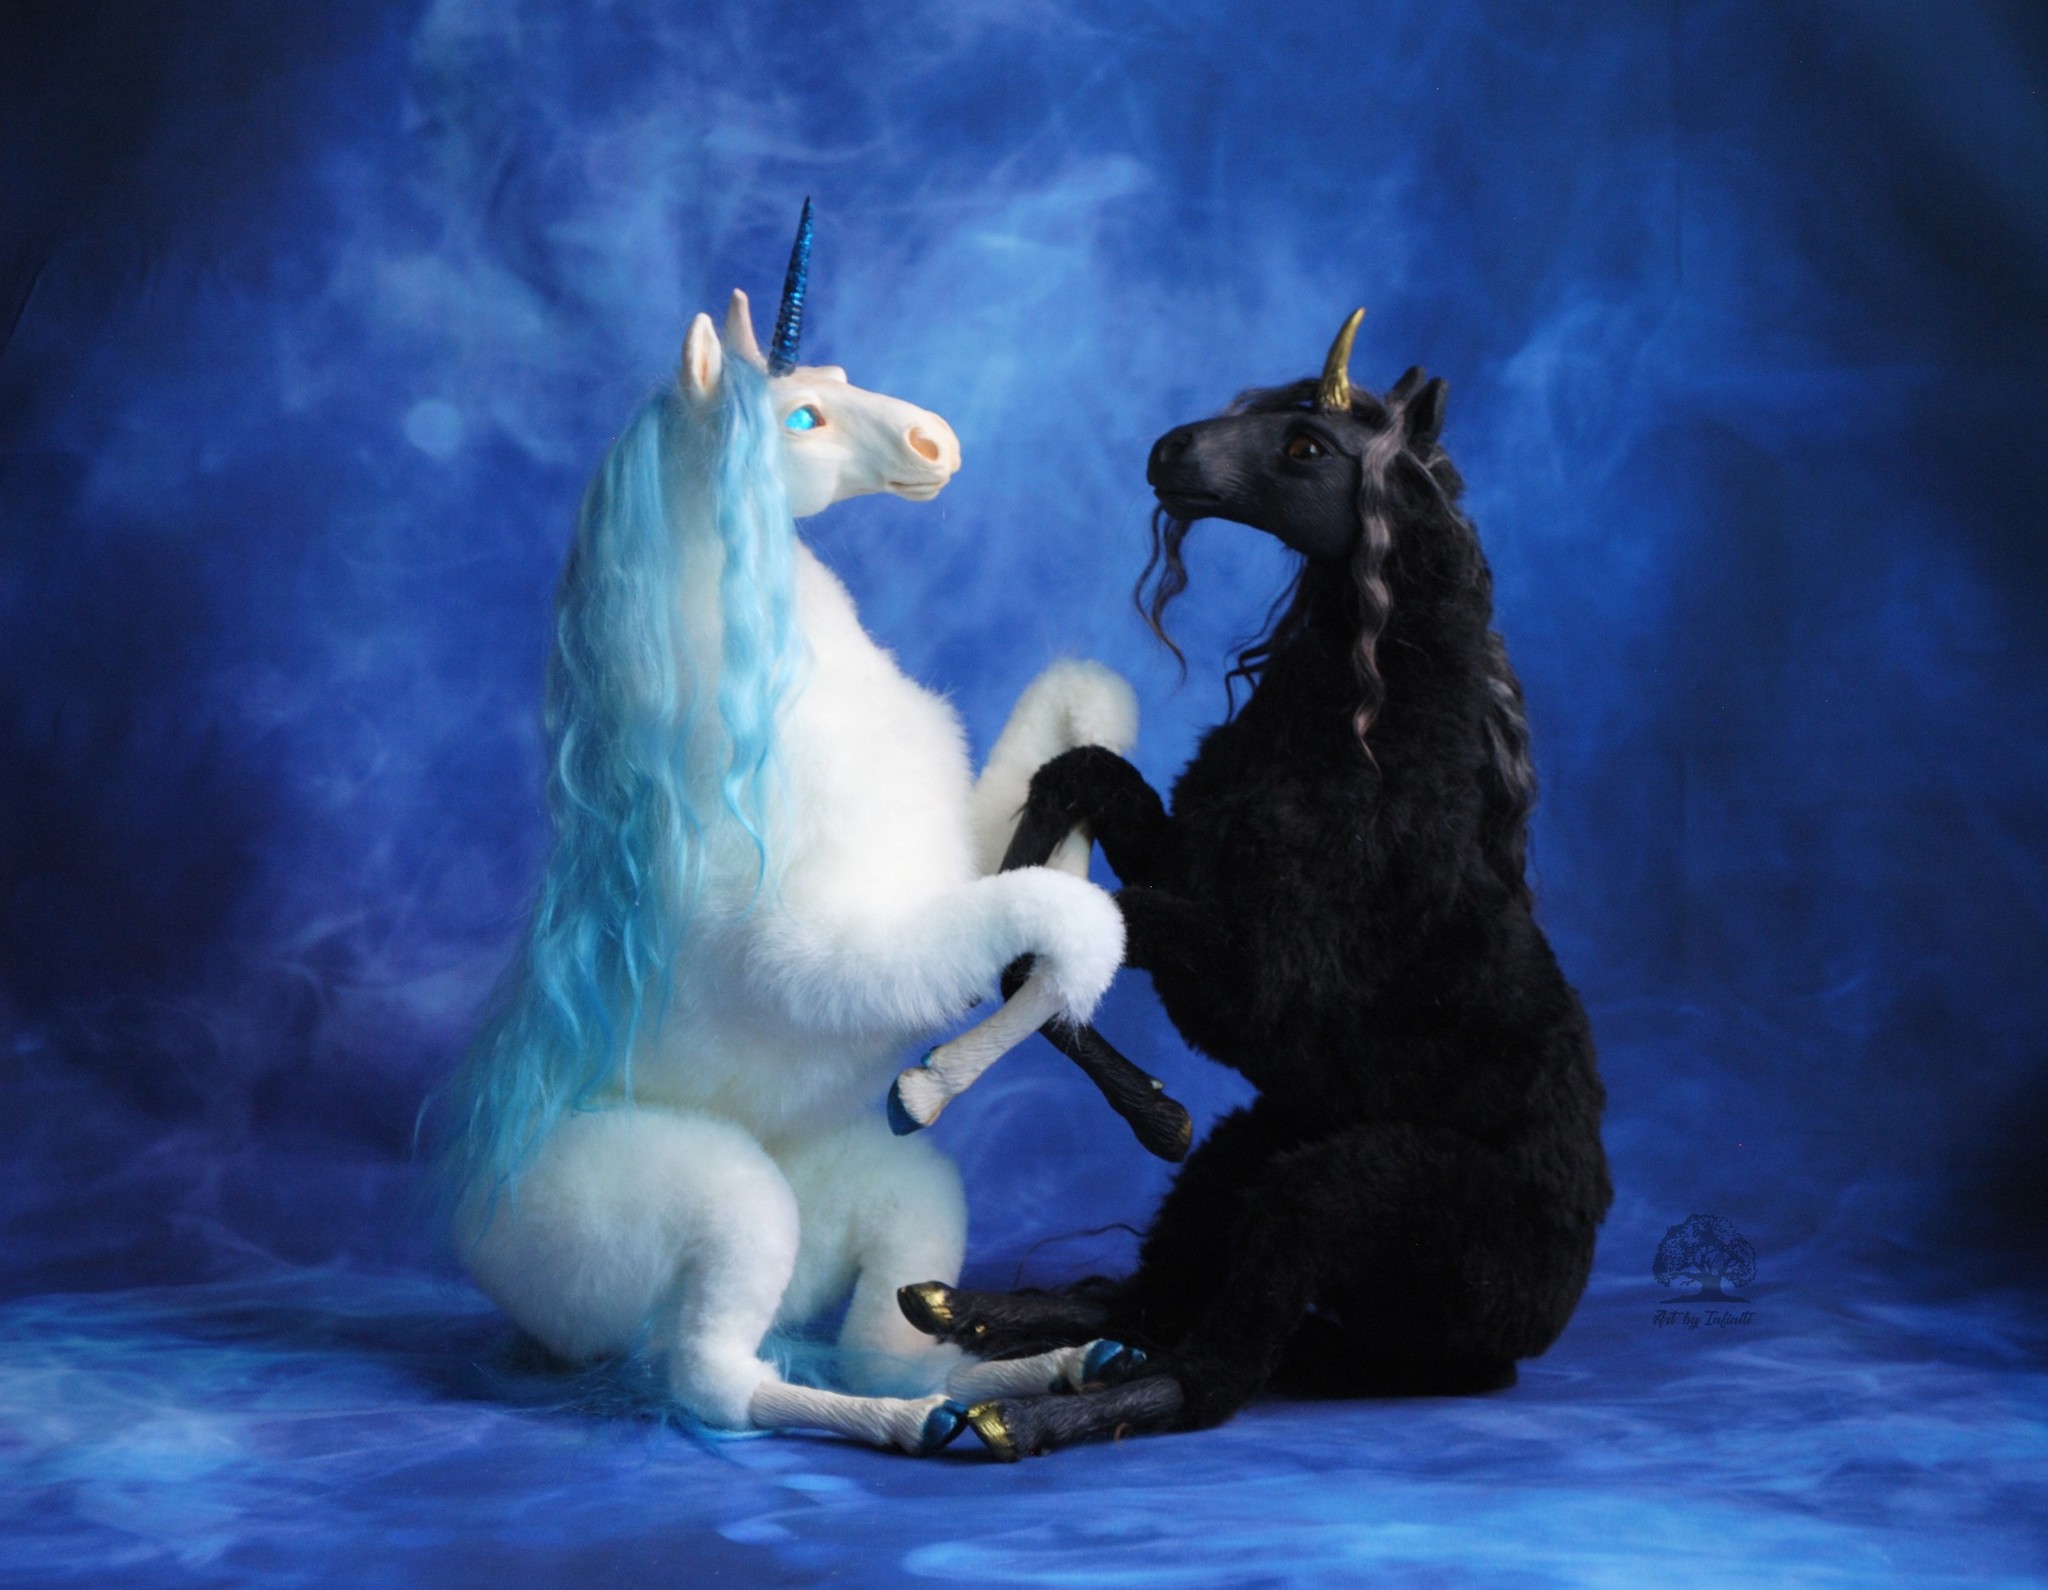 Unicorns - moving toys in mixed media - My, Unicorn, Polymer clay, Pair, Author's toy, Horses, Needlework without process, Longpost